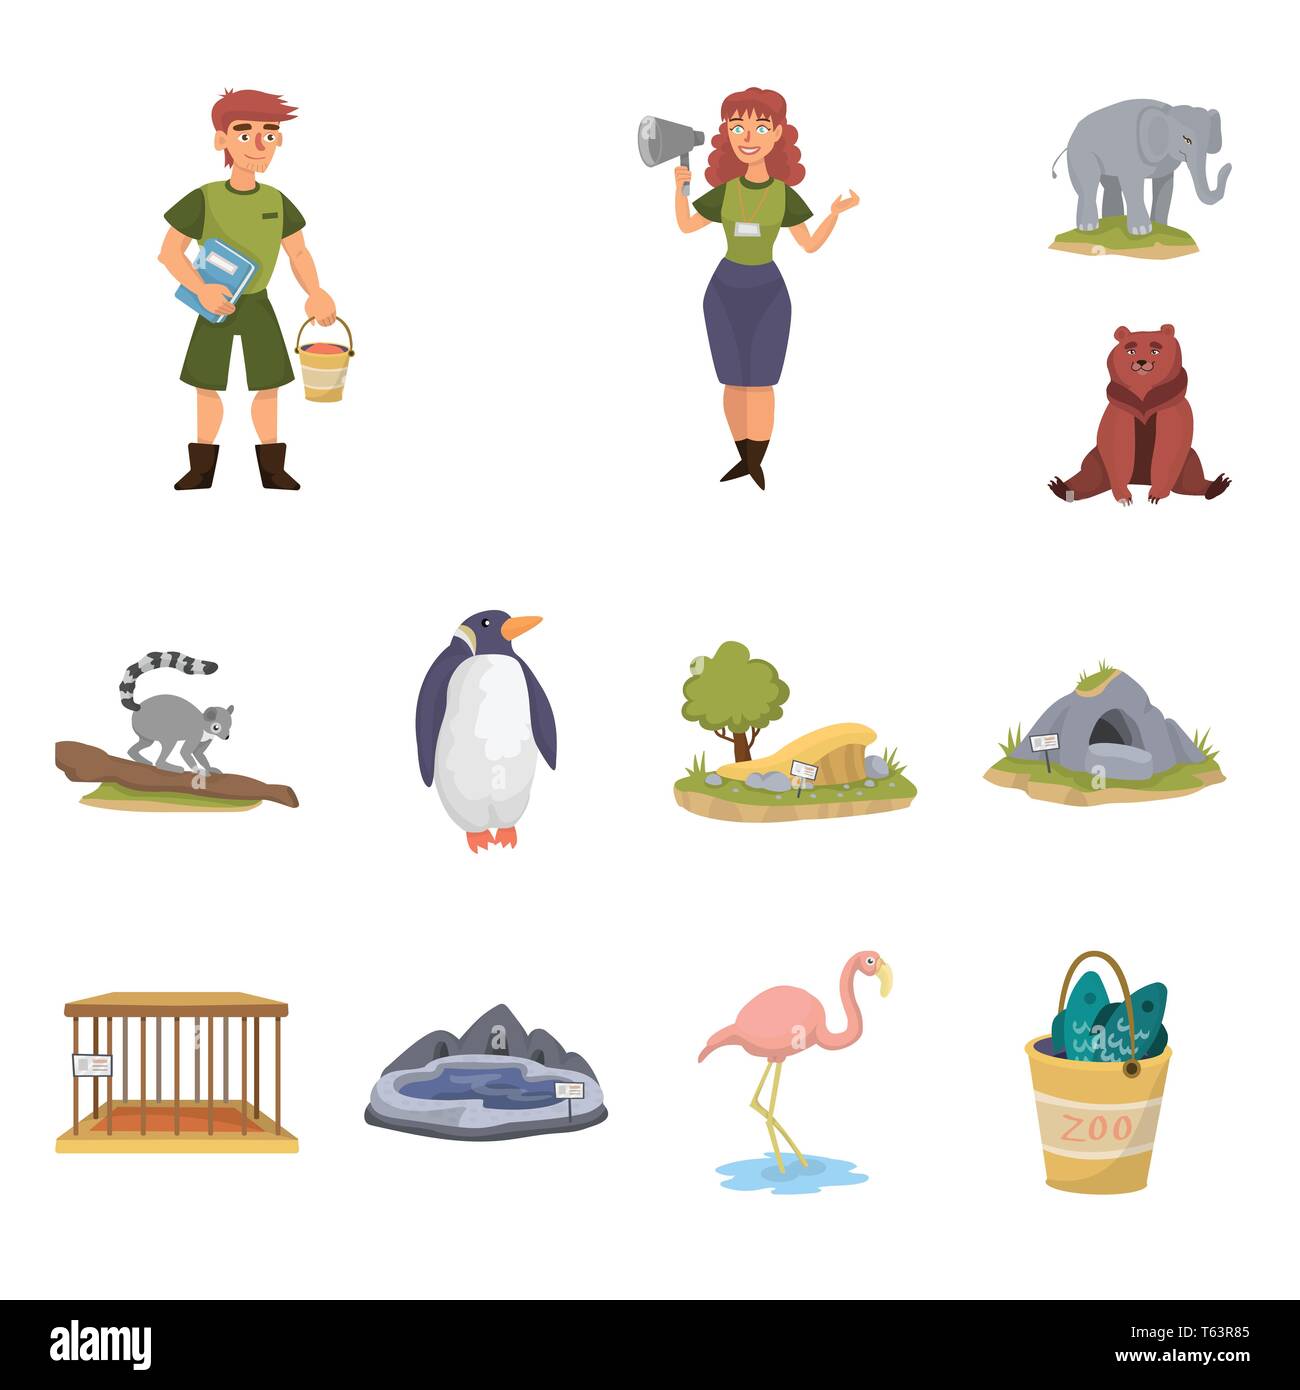 zookeeper,elephant,bear,lemur,penguin,trees,cave,cell,lake,flamingo,bucket,man,woman,cute,brown,monkey,white,sand,empty,pool,pink,fish,worker,megaphone,nursery,Africa,mound,grizzly,zoo,park,safari,animal,forest,nature,fun,flora,fauna,entertainment,set,vector,icon,illustration,isolated,collection,design,element,graphic,sign,cartoon,color Vector Vectors , Stock Vector